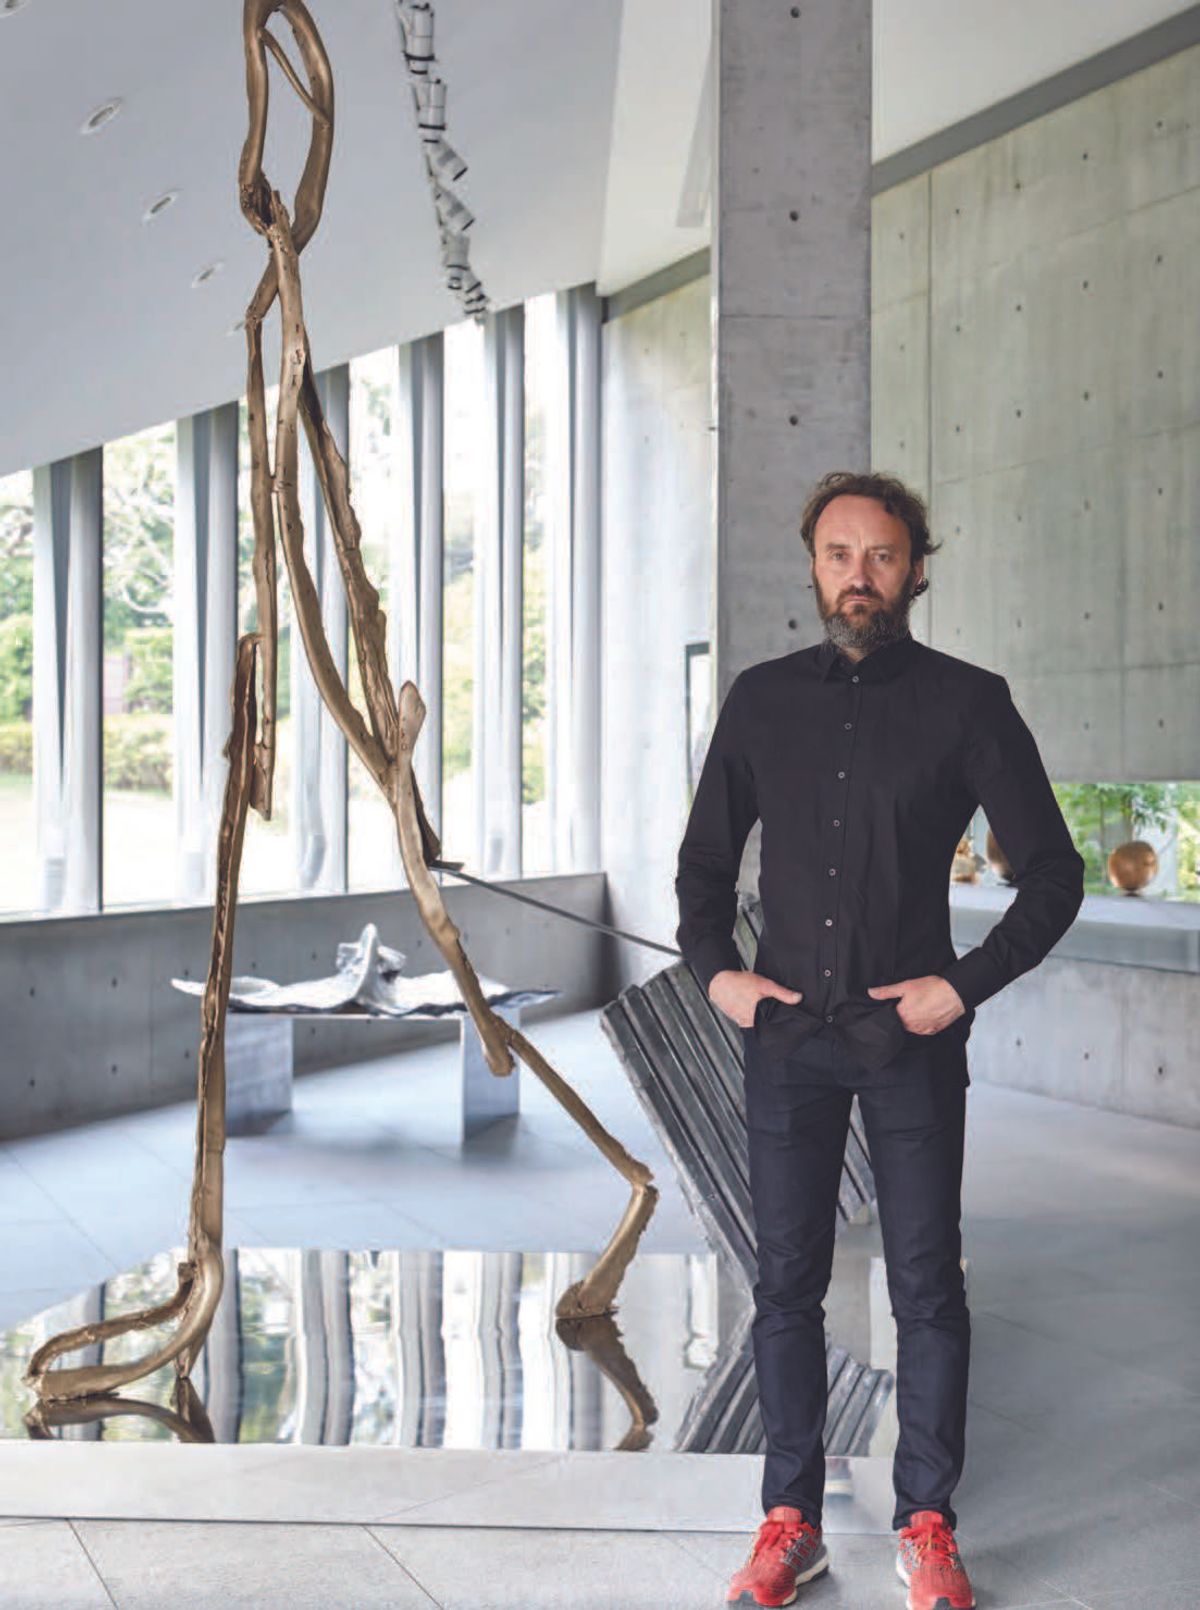 Patrick Roger with his bronze and aluminium sculpture L’homme qui voyage (The man who travels), 2017 